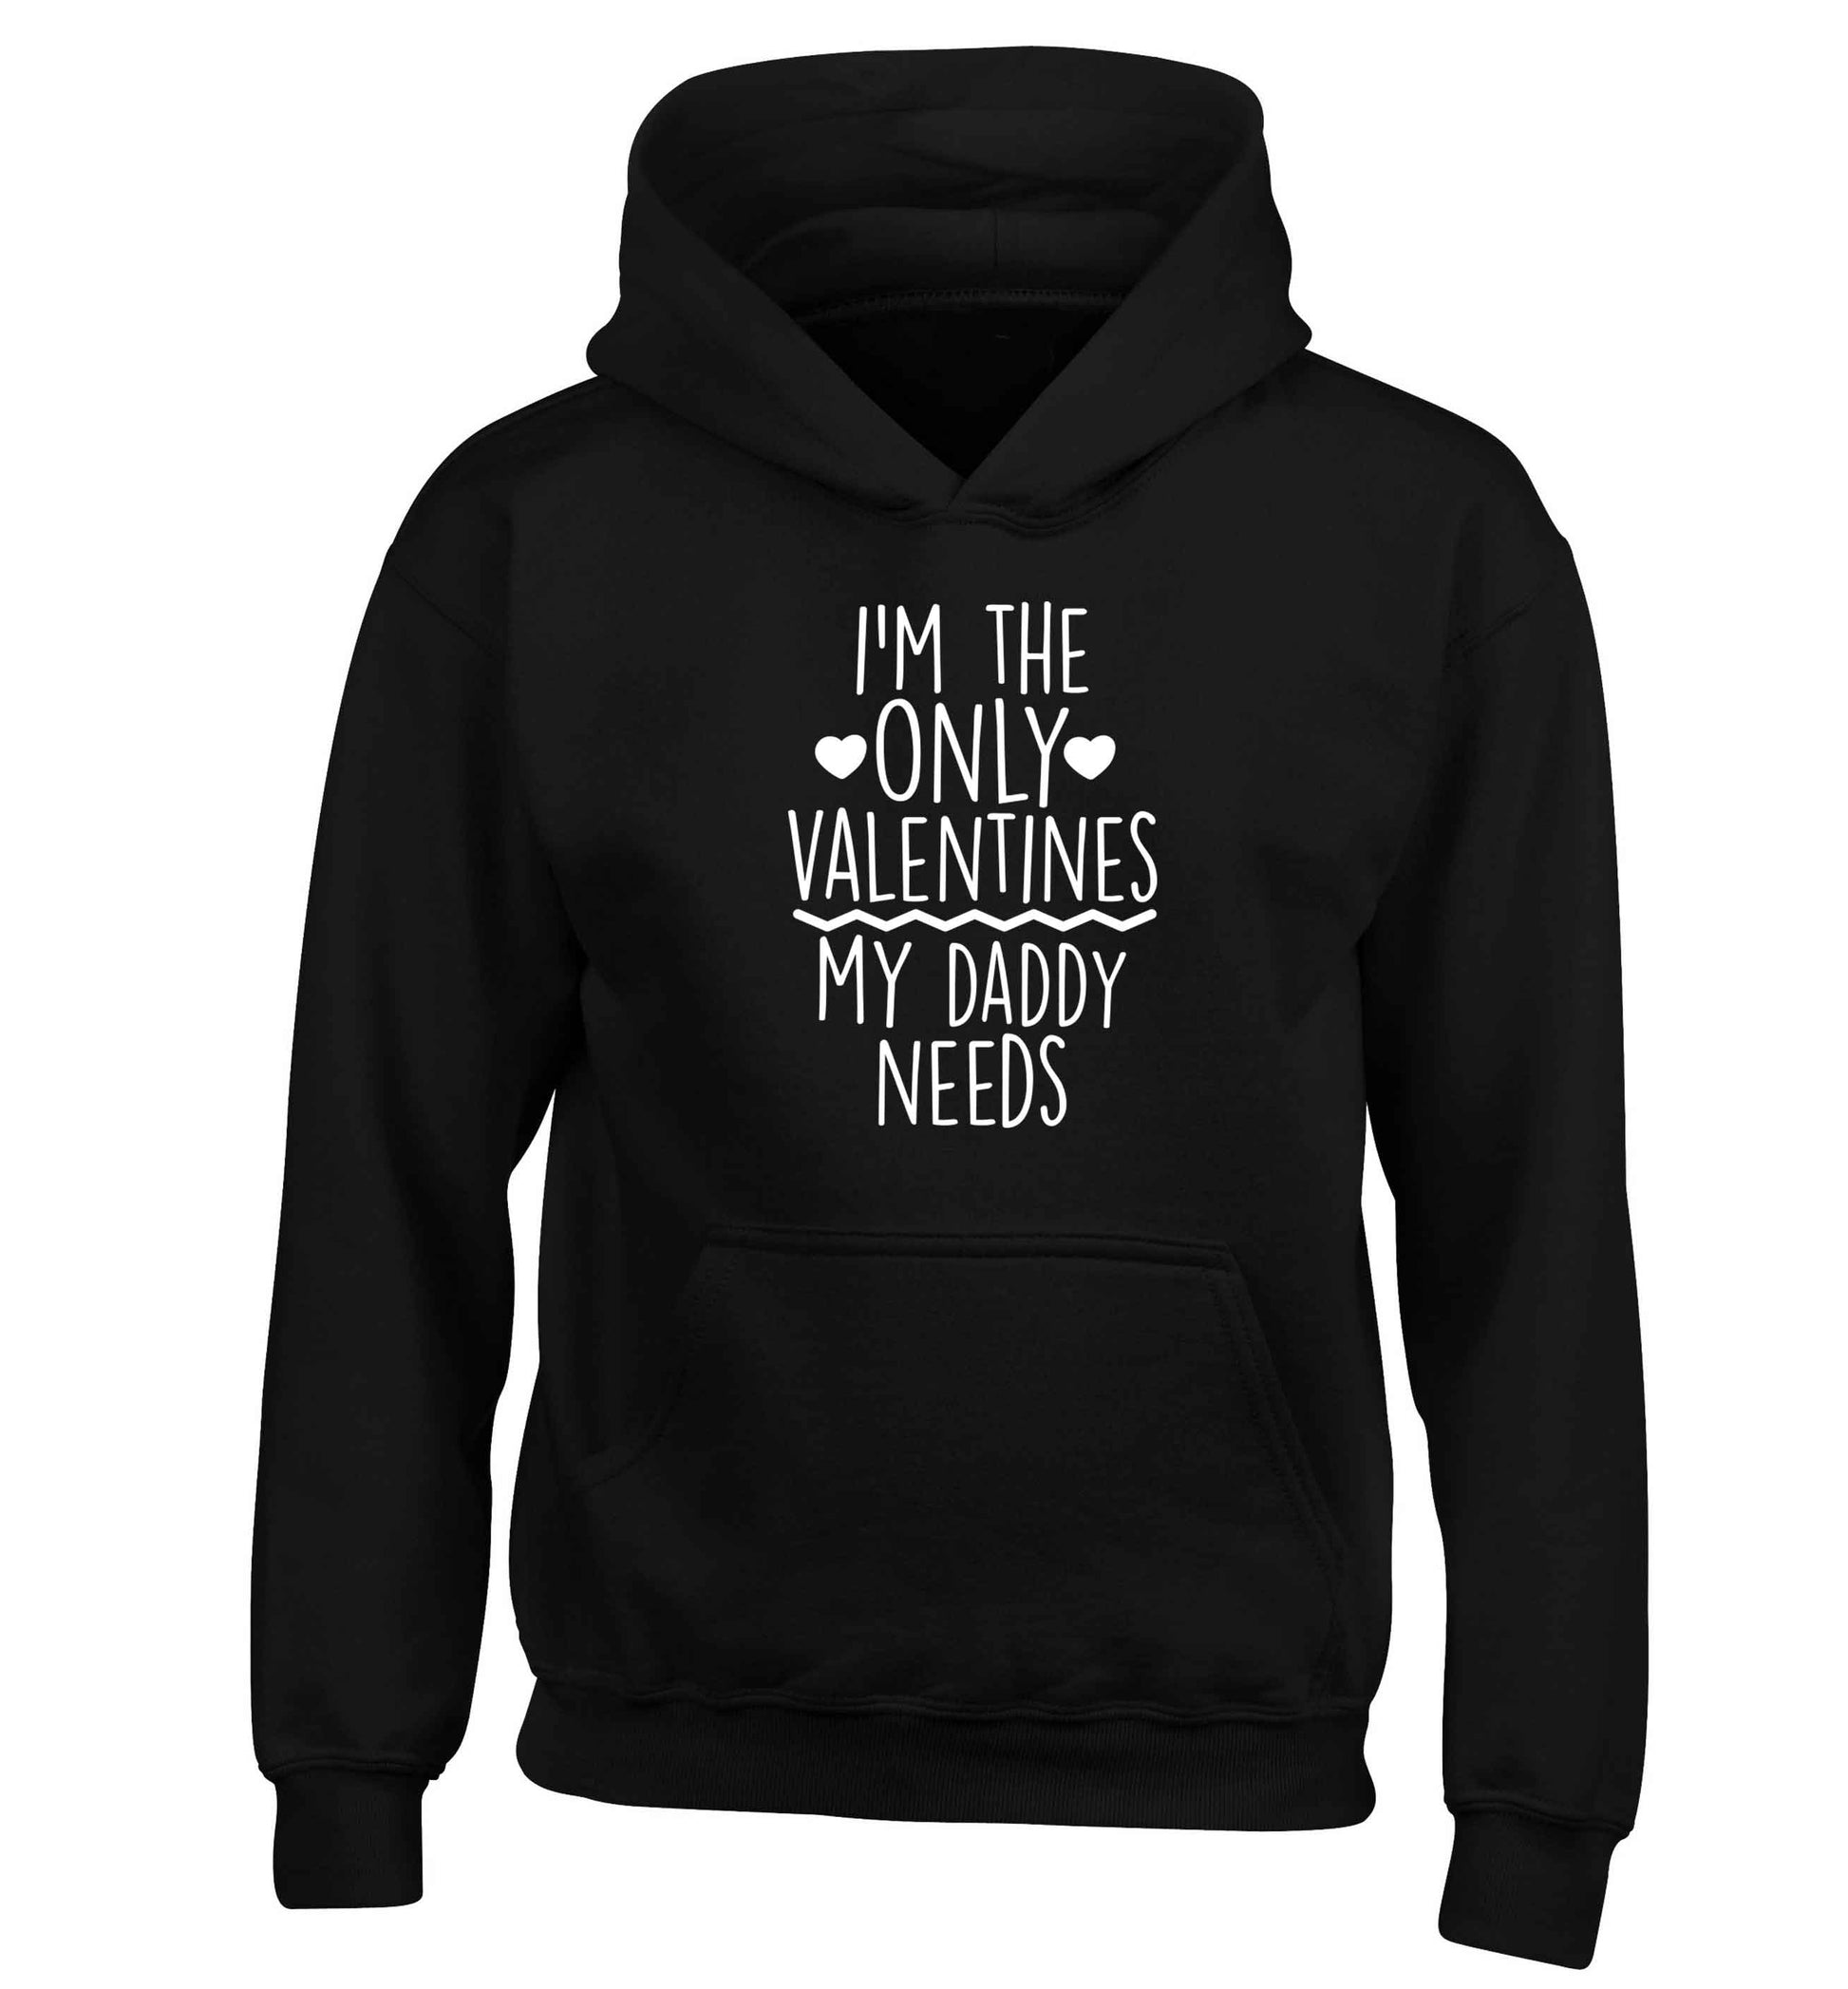 I'm the only valentines my daddy needs children's black hoodie 12-13 Years